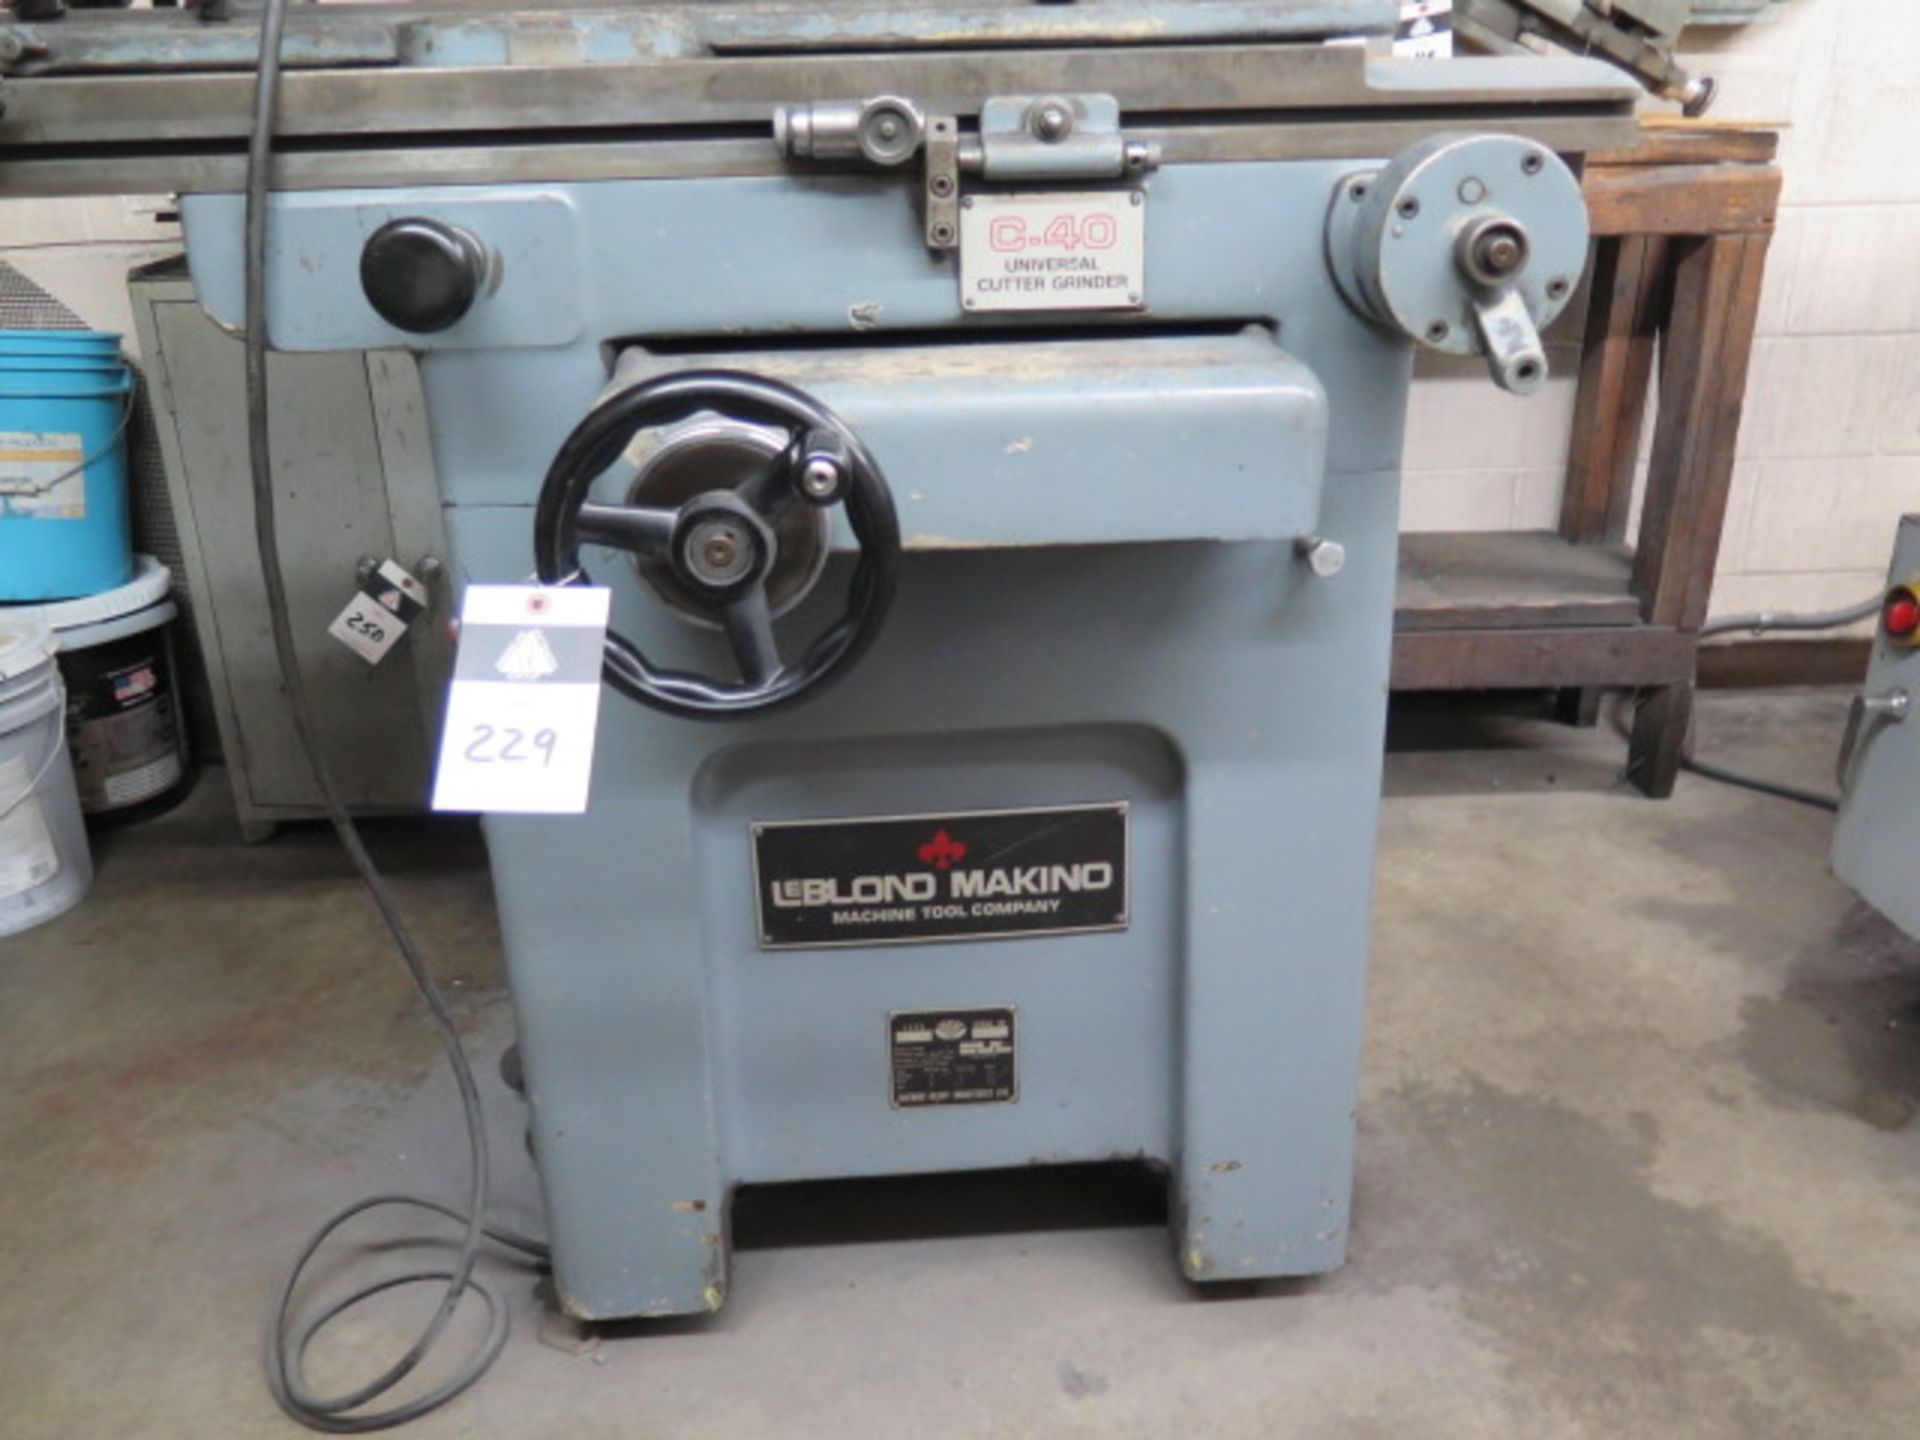 LeBlond Makino C-40 Universal Tool &Cutter Grinder s/n 81-0027 w/ Compound Grinding Head, SOLD AS IS - Image 10 of 12